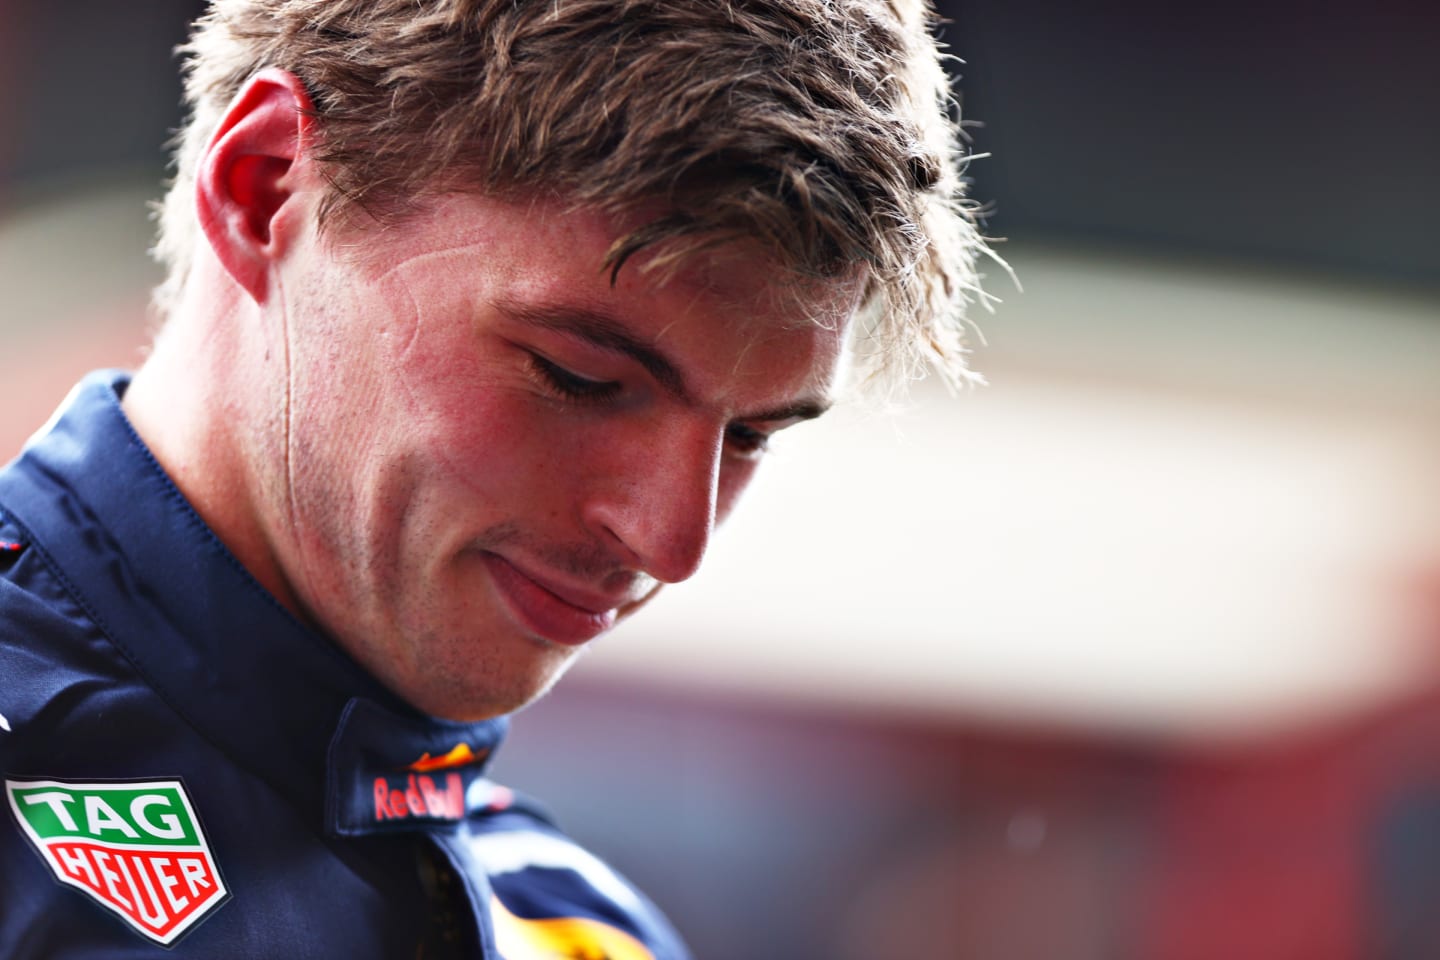 SPA, BELGIUM - AUGUST 28: Pole position qualifier Max Verstappen of Netherlands and Red Bull Racing looks on in parc ferme during qualifying ahead of the F1 Grand Prix of Belgium at Circuit de Spa-Francorchamps on August 28, 2021 in Spa, Belgium. (Photo by Dan Istitene - Formula 1/Formula 1 via Getty Images)